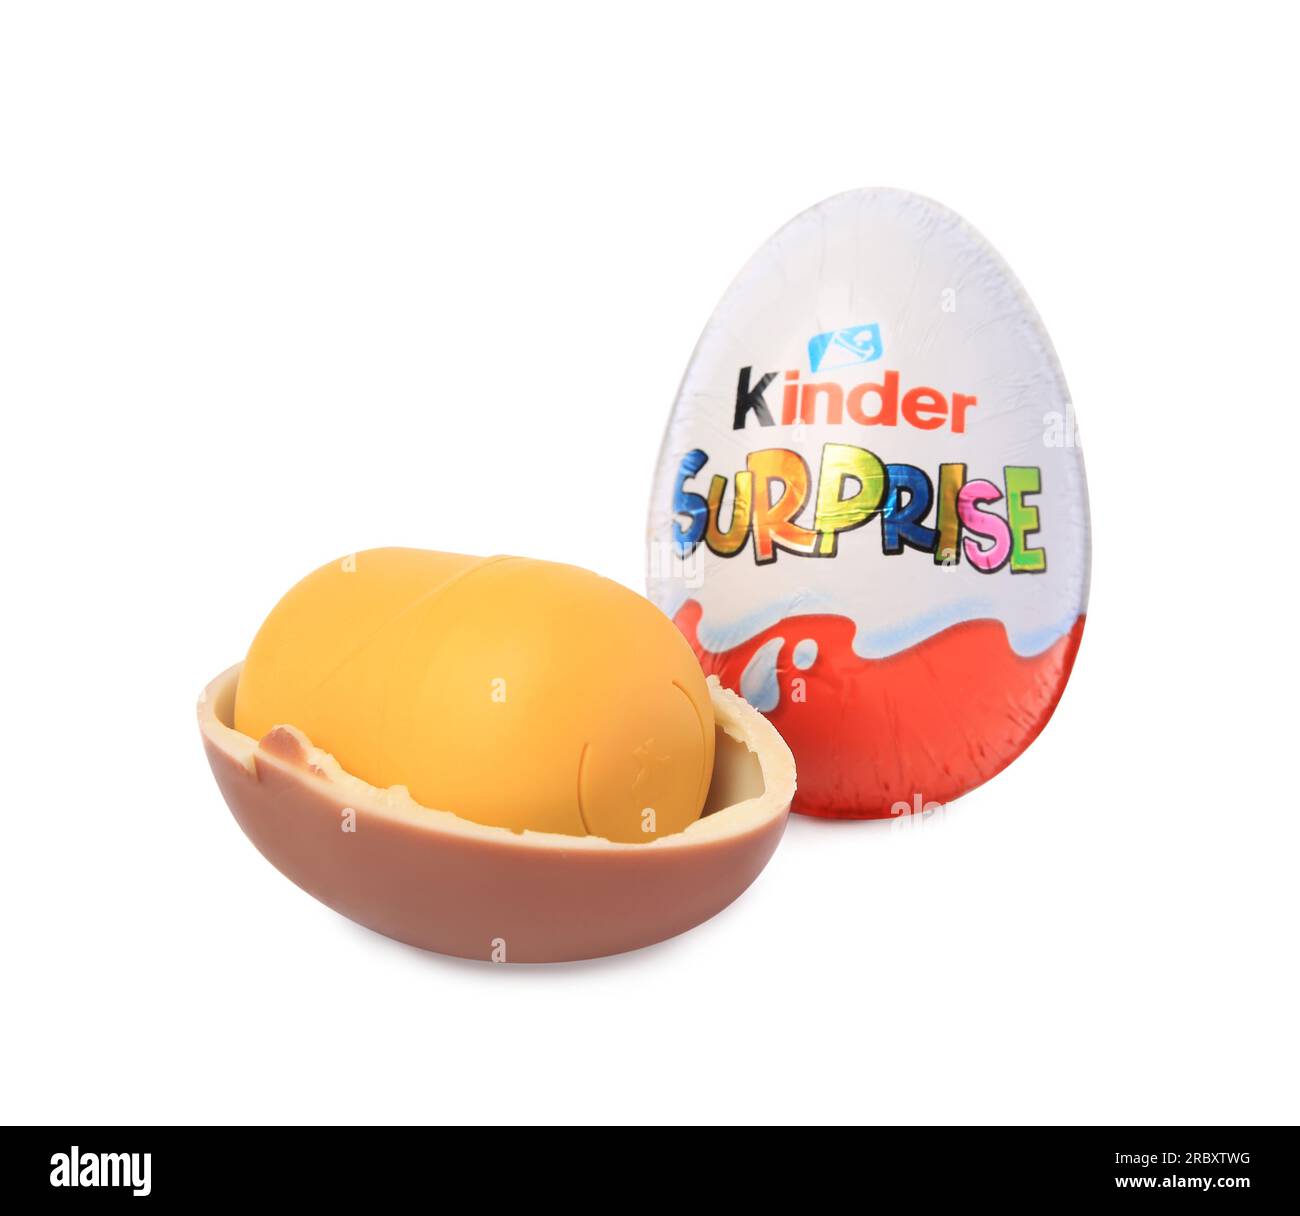 Kinder surprise Cut Out Stock Images & Pictures - Alamy